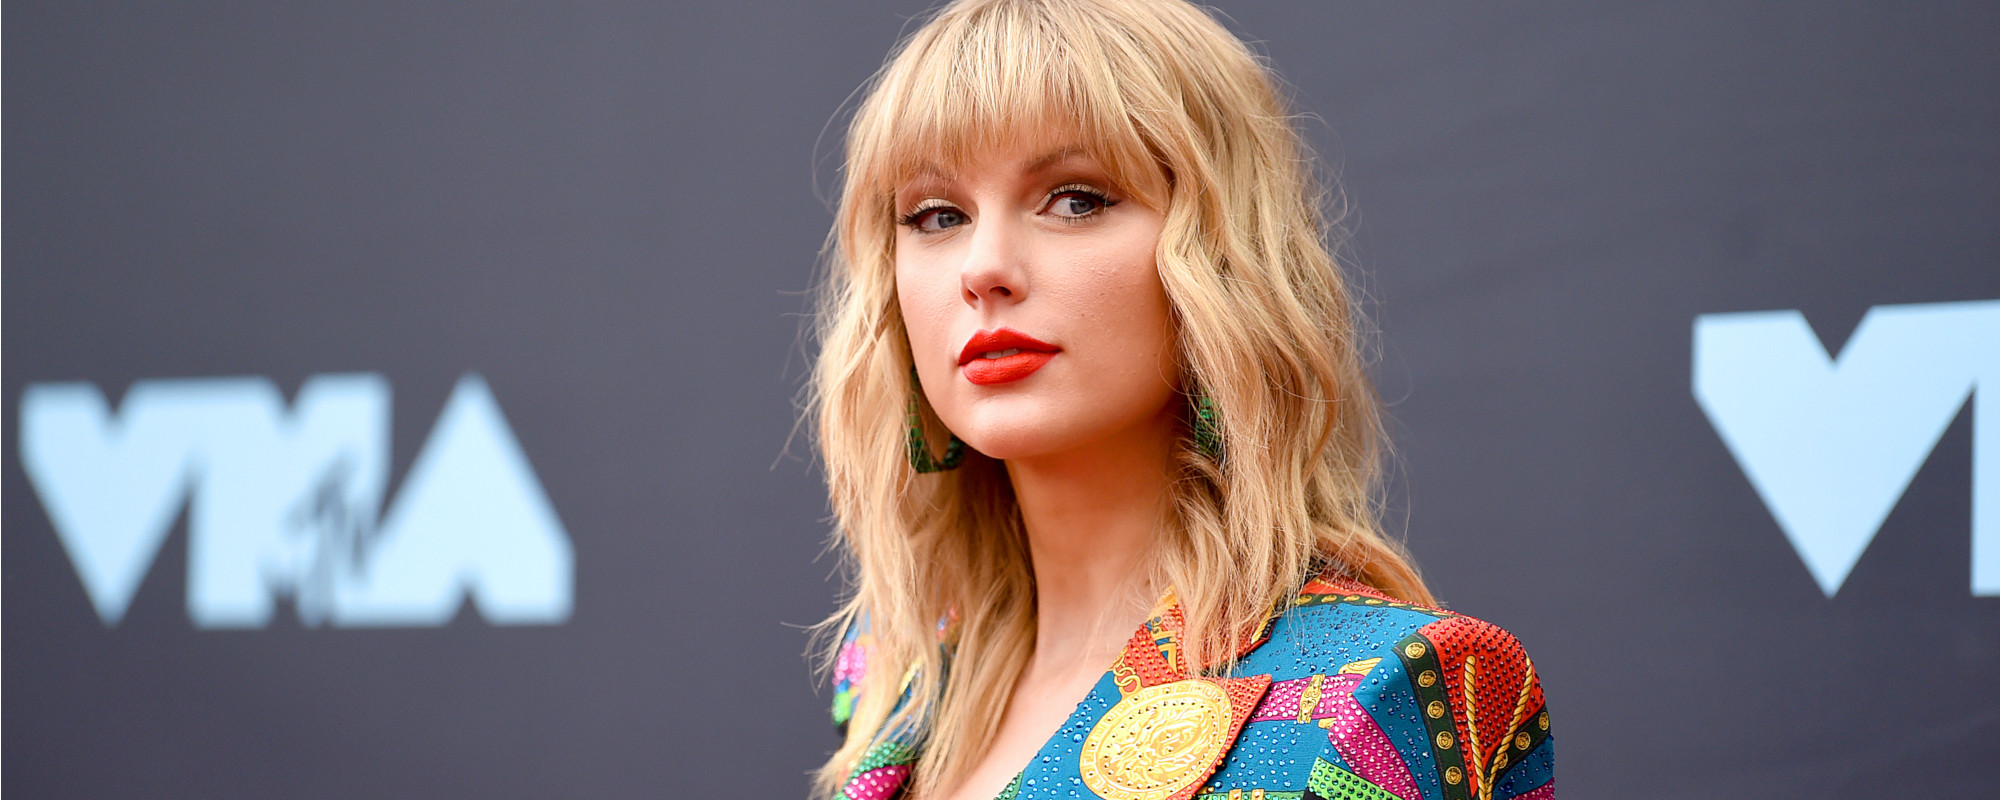 Taylor Swift’s Unfathomable Reign Continues as She Dominates Half of Top 10 Selling Albums Chart—Again